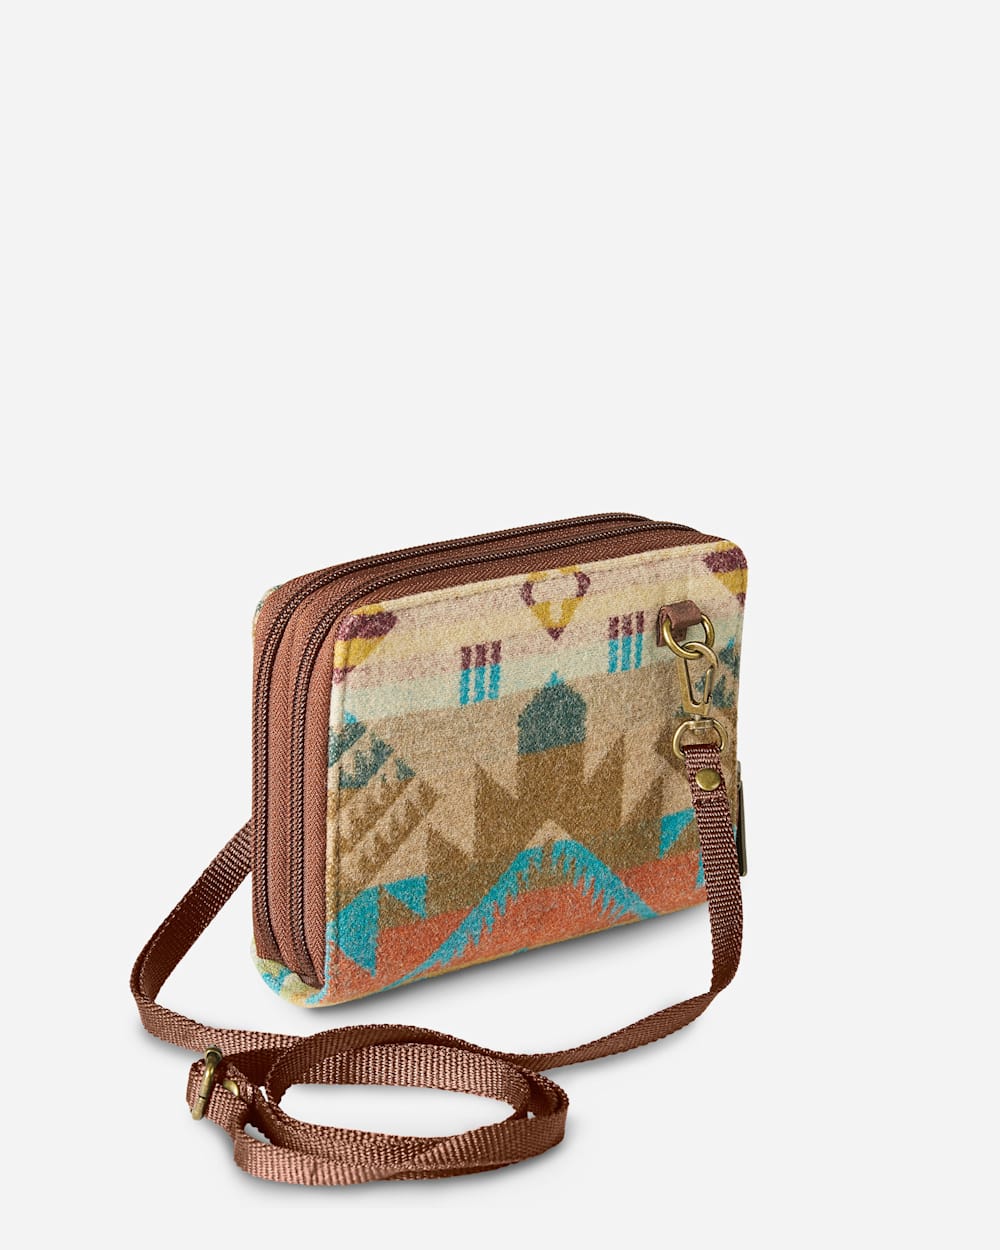 ALTERNATE VIEW OF JACQUARD WALLET ON STRAP IN JOURNEY WEST TURQUOISE image number 2